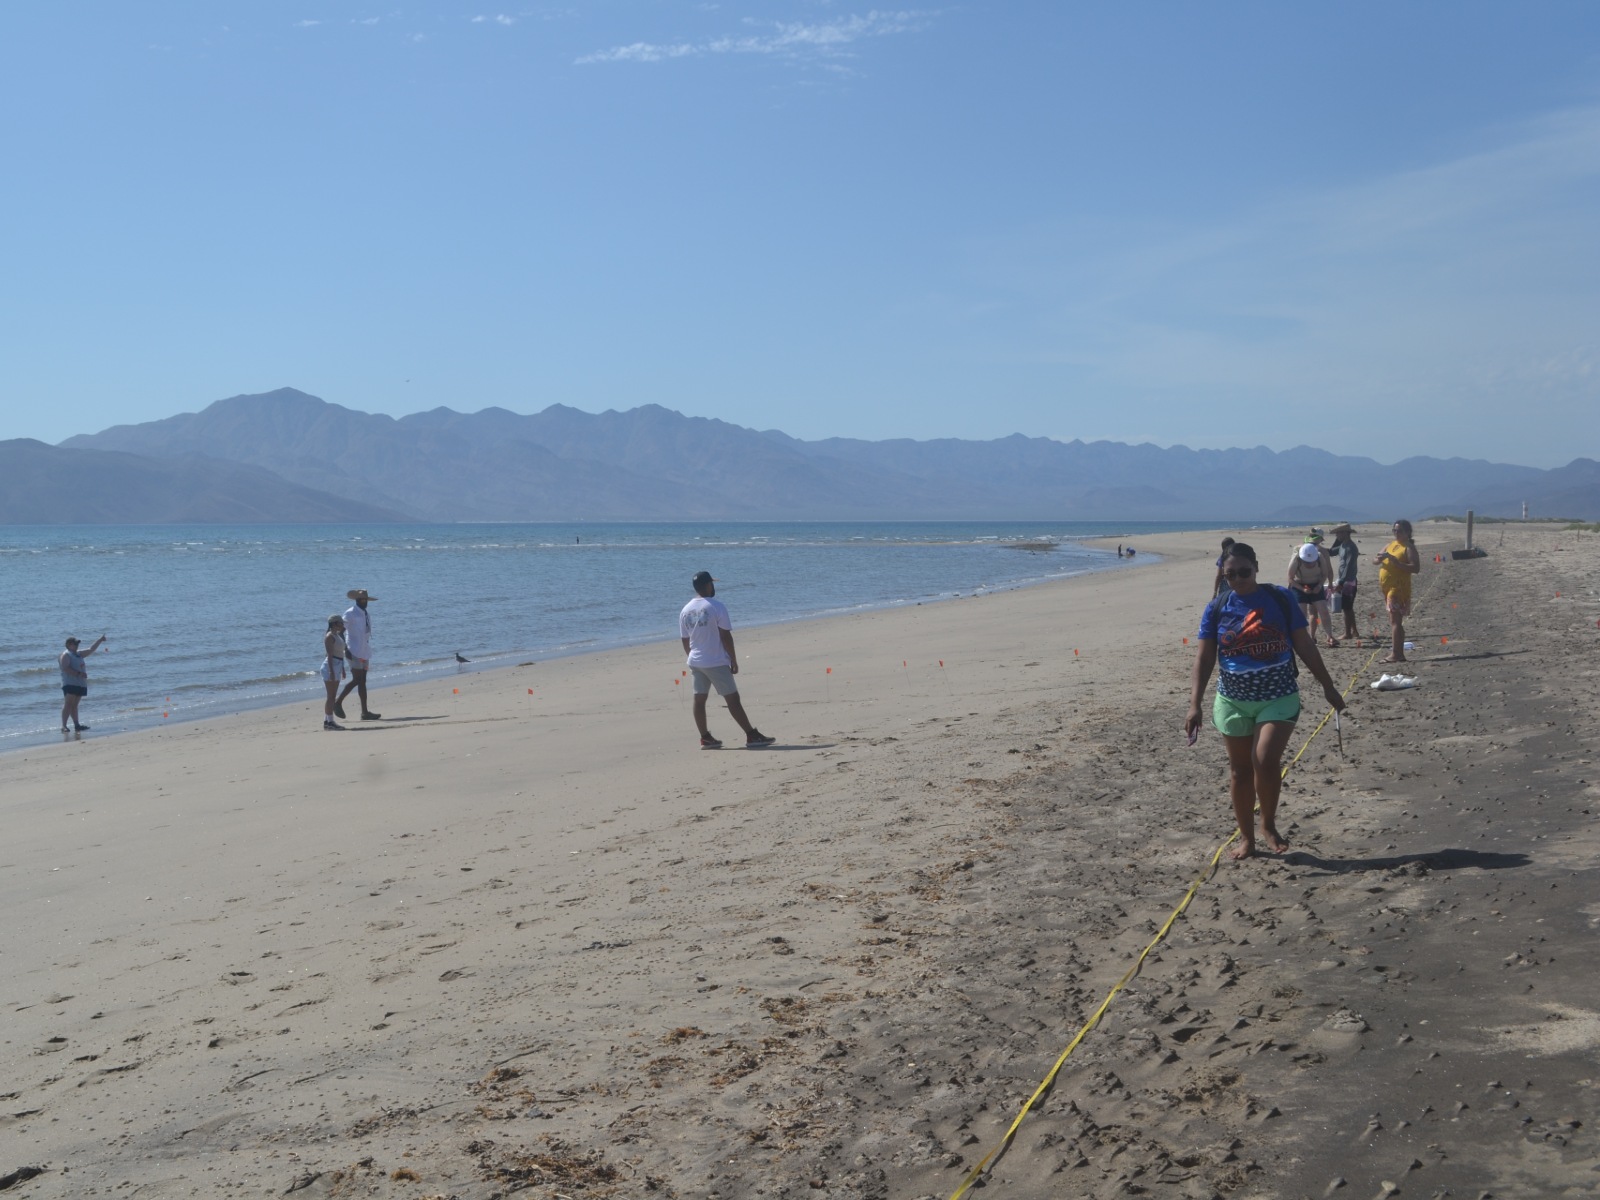 Students working on the beach